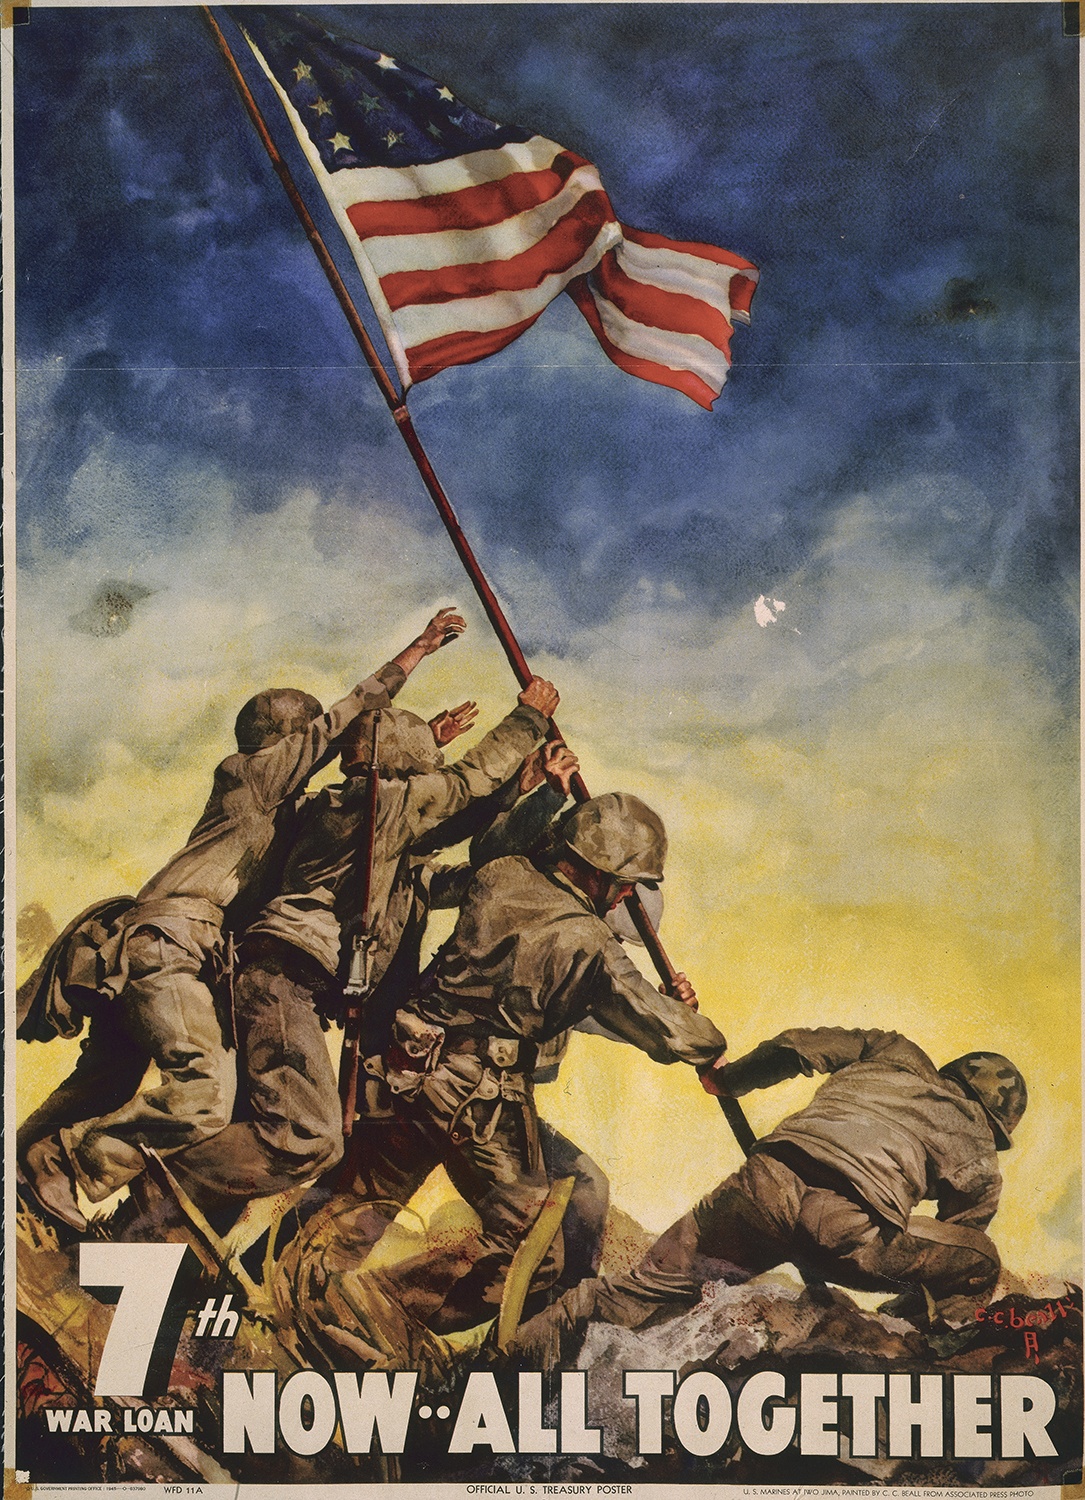 “7th war loan poster, Now ... All Together,” C. C. Beall, poster, U. S. Government Printing Office for the Department of the Treasury, 1945.